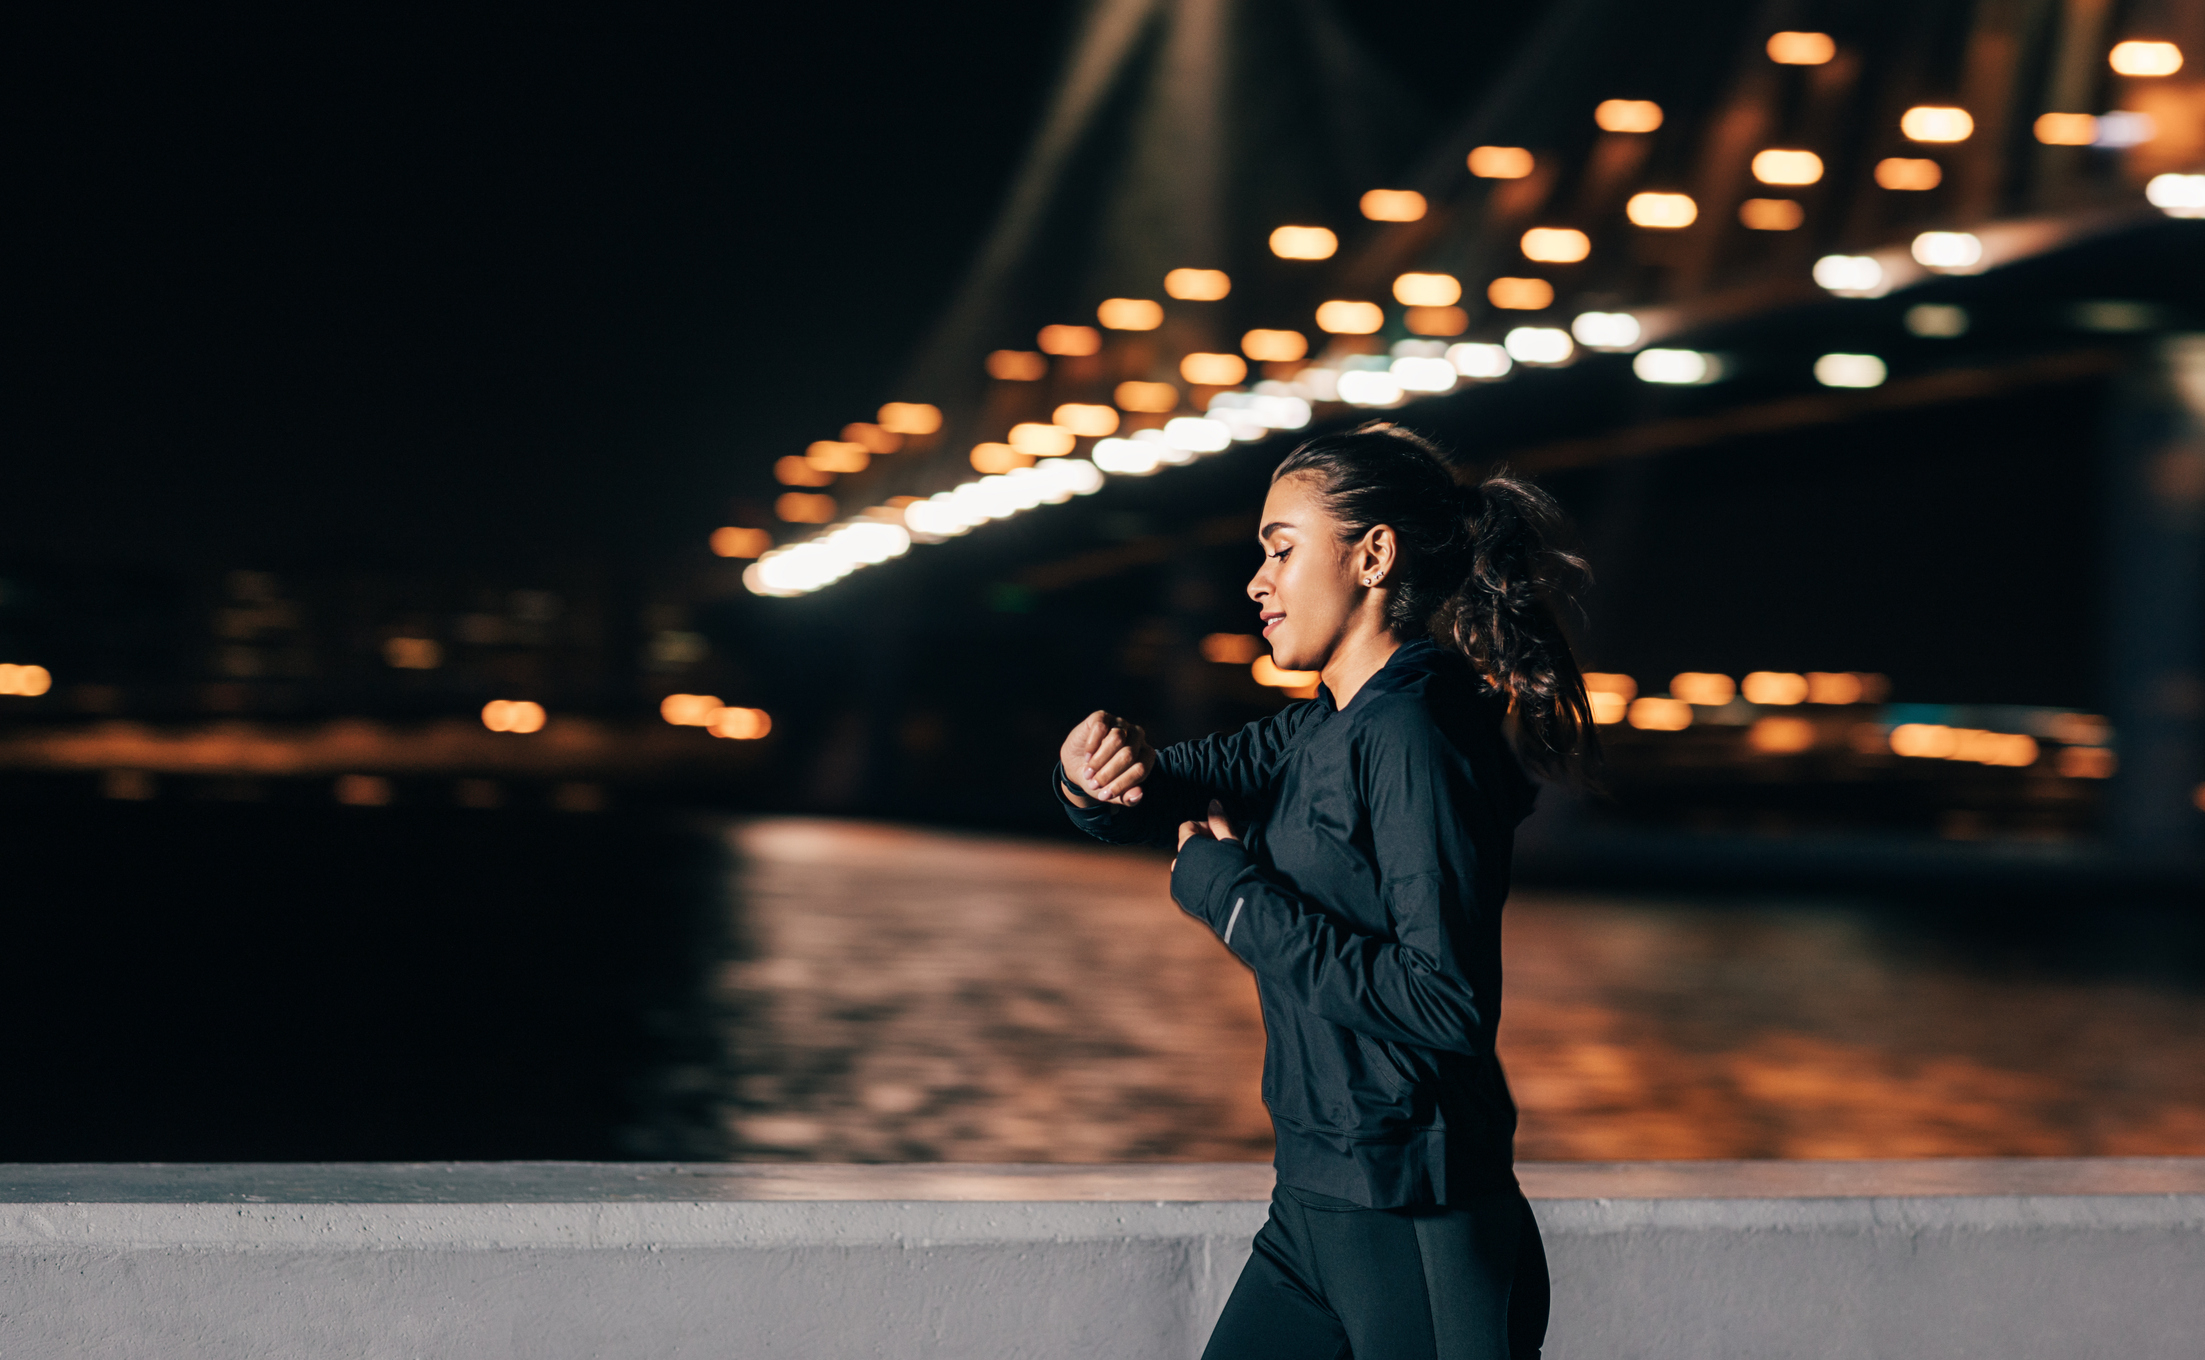 A young woman jogging during night, with city lights in the background, as she checks her exercise watch to see her pace